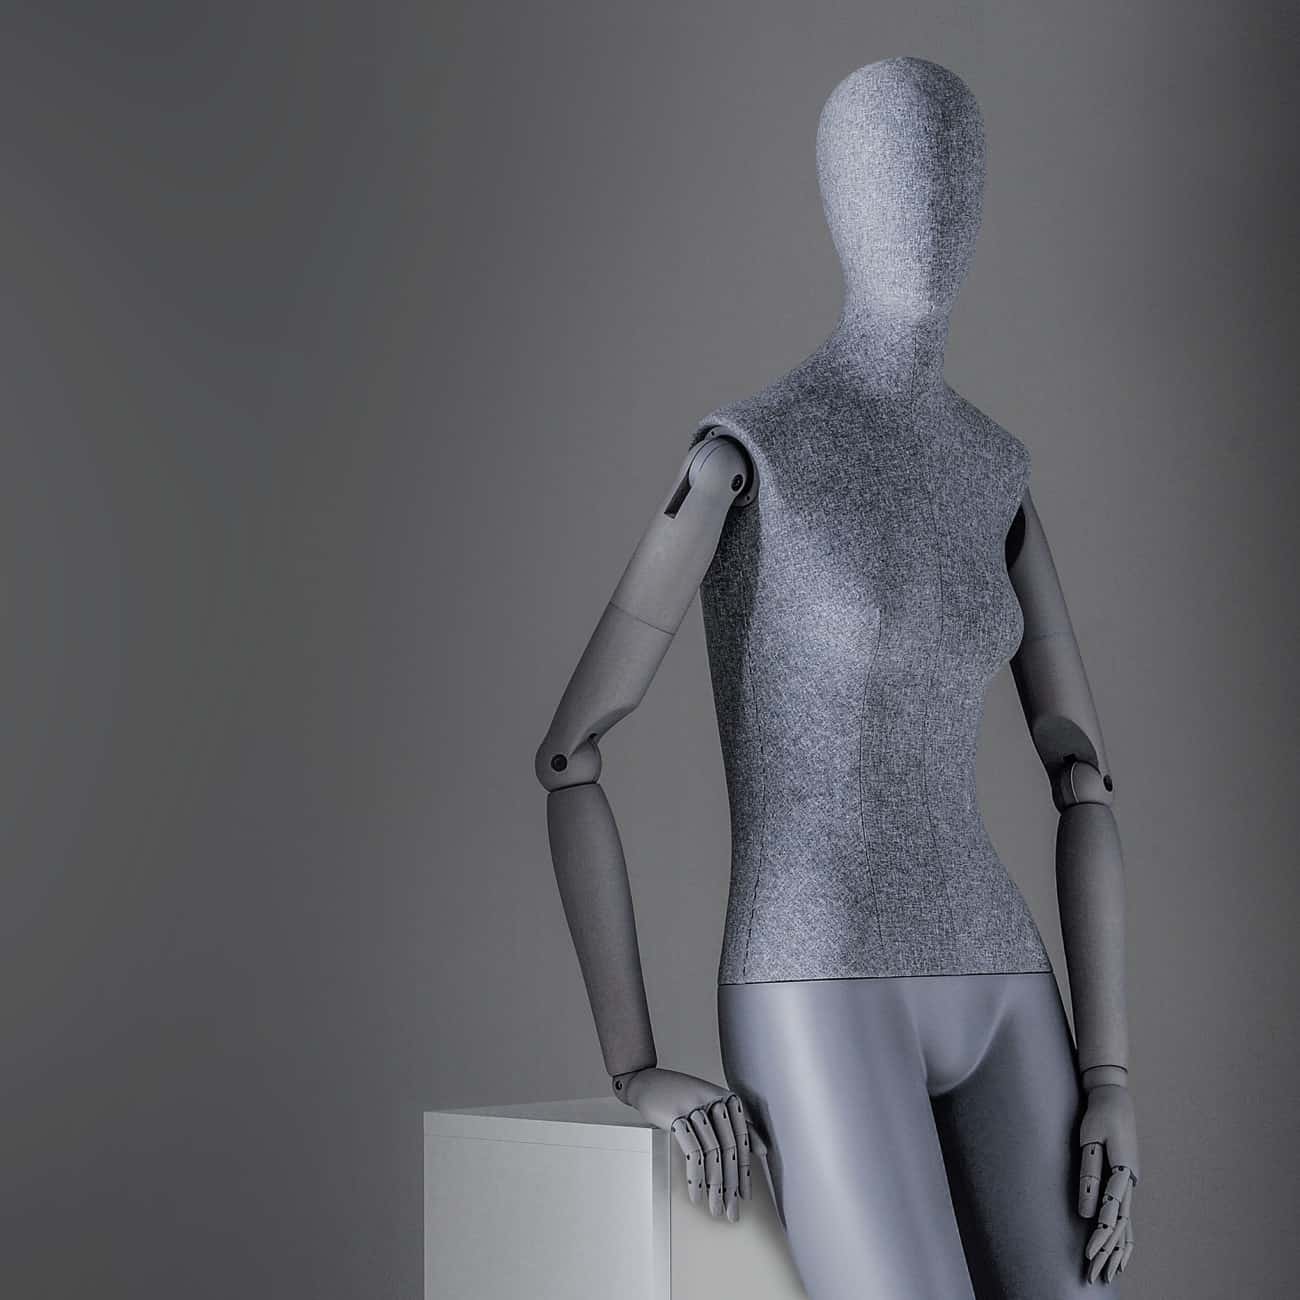 Sartorial Women | Seated female mannequin with articulated arms